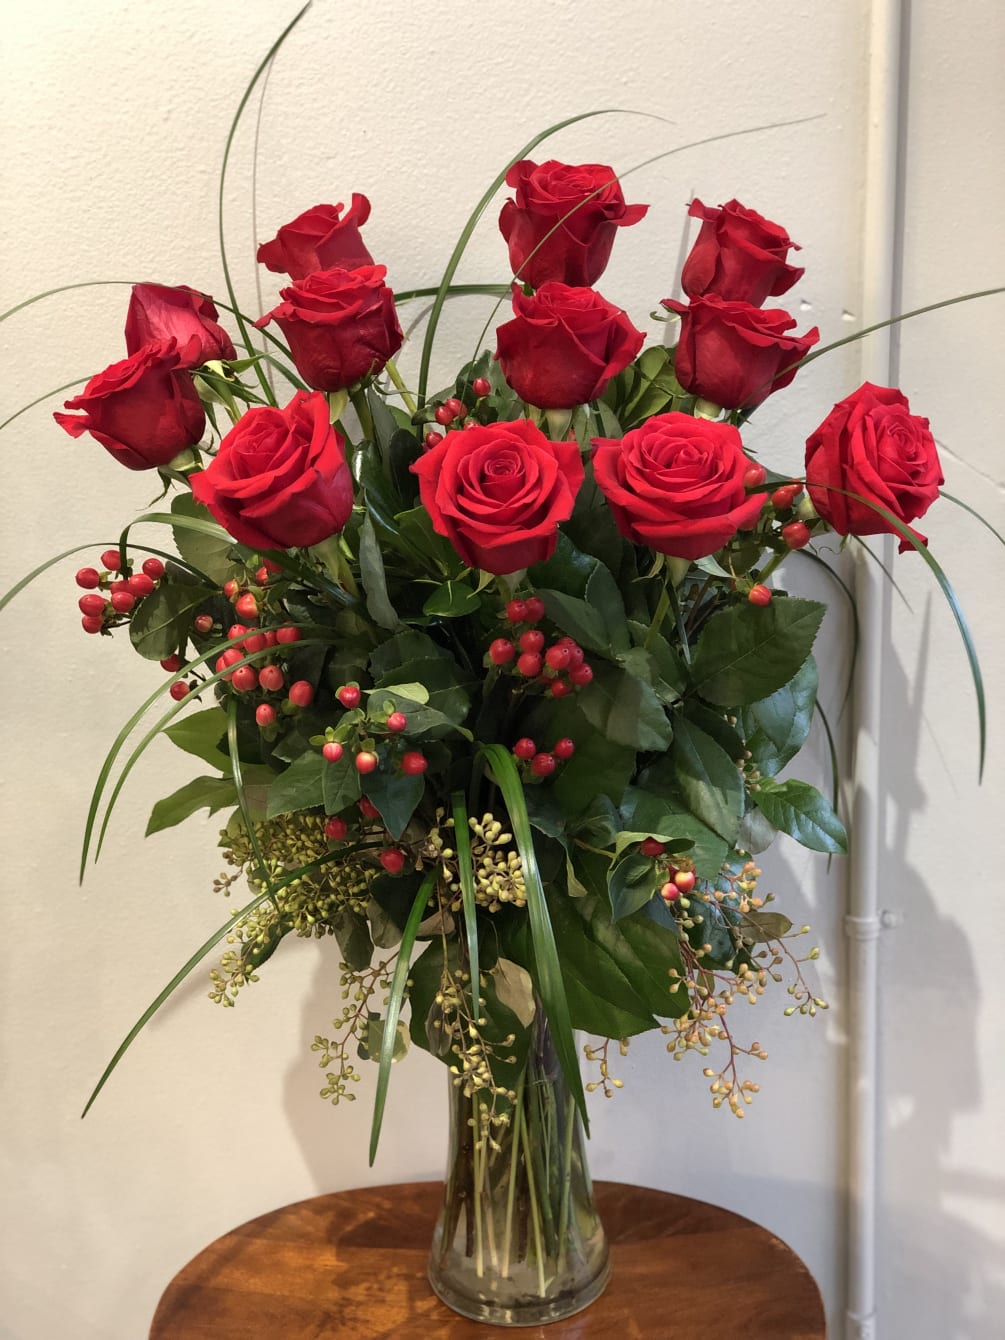 Our version of traditional one dozen roses that would truly brighten someone&#039;s